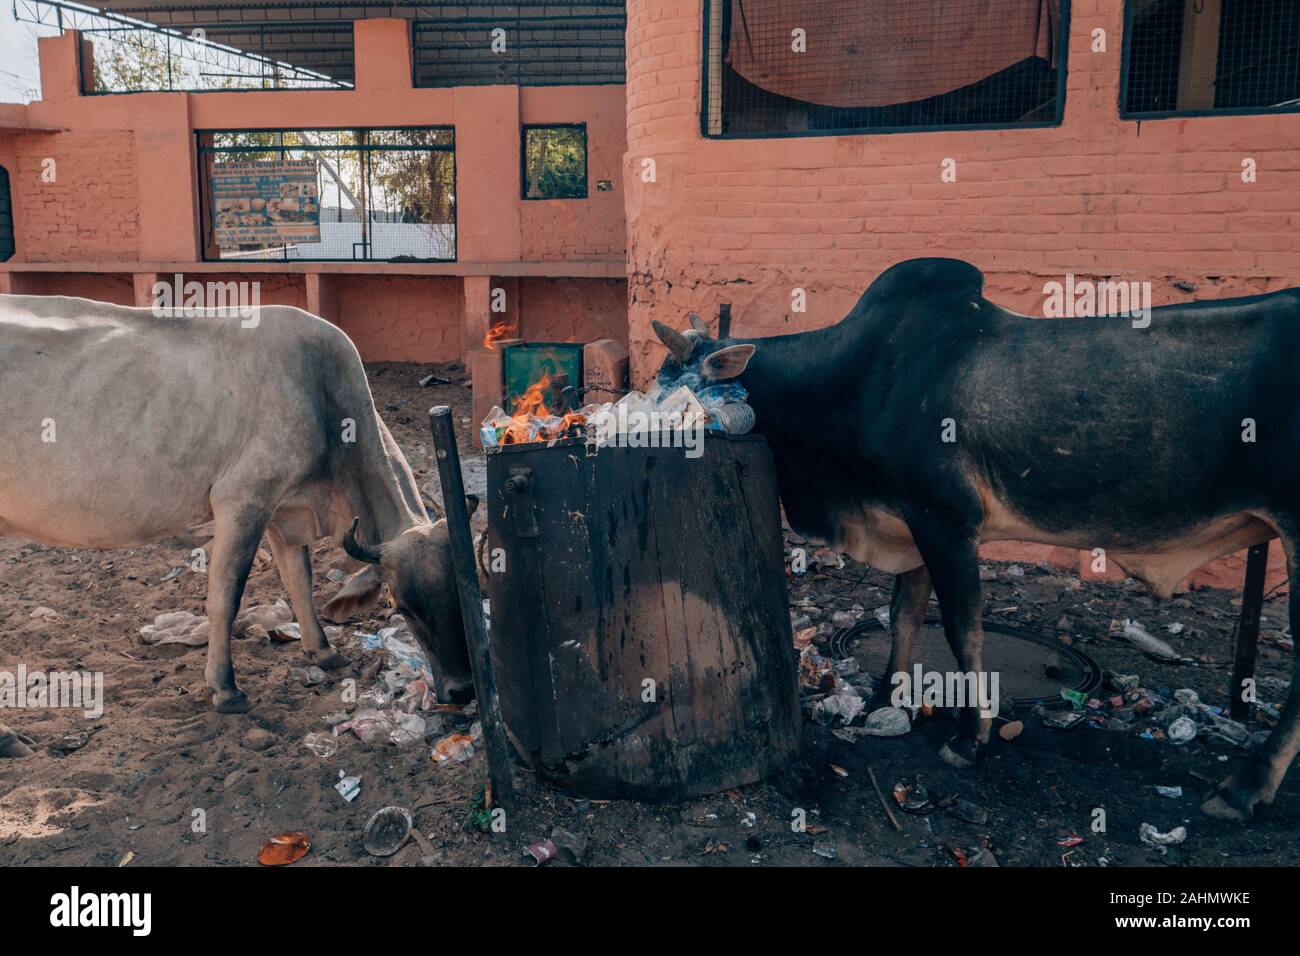 Cows Eating Trash On The Street In India An Environmental Issue Stock Photo